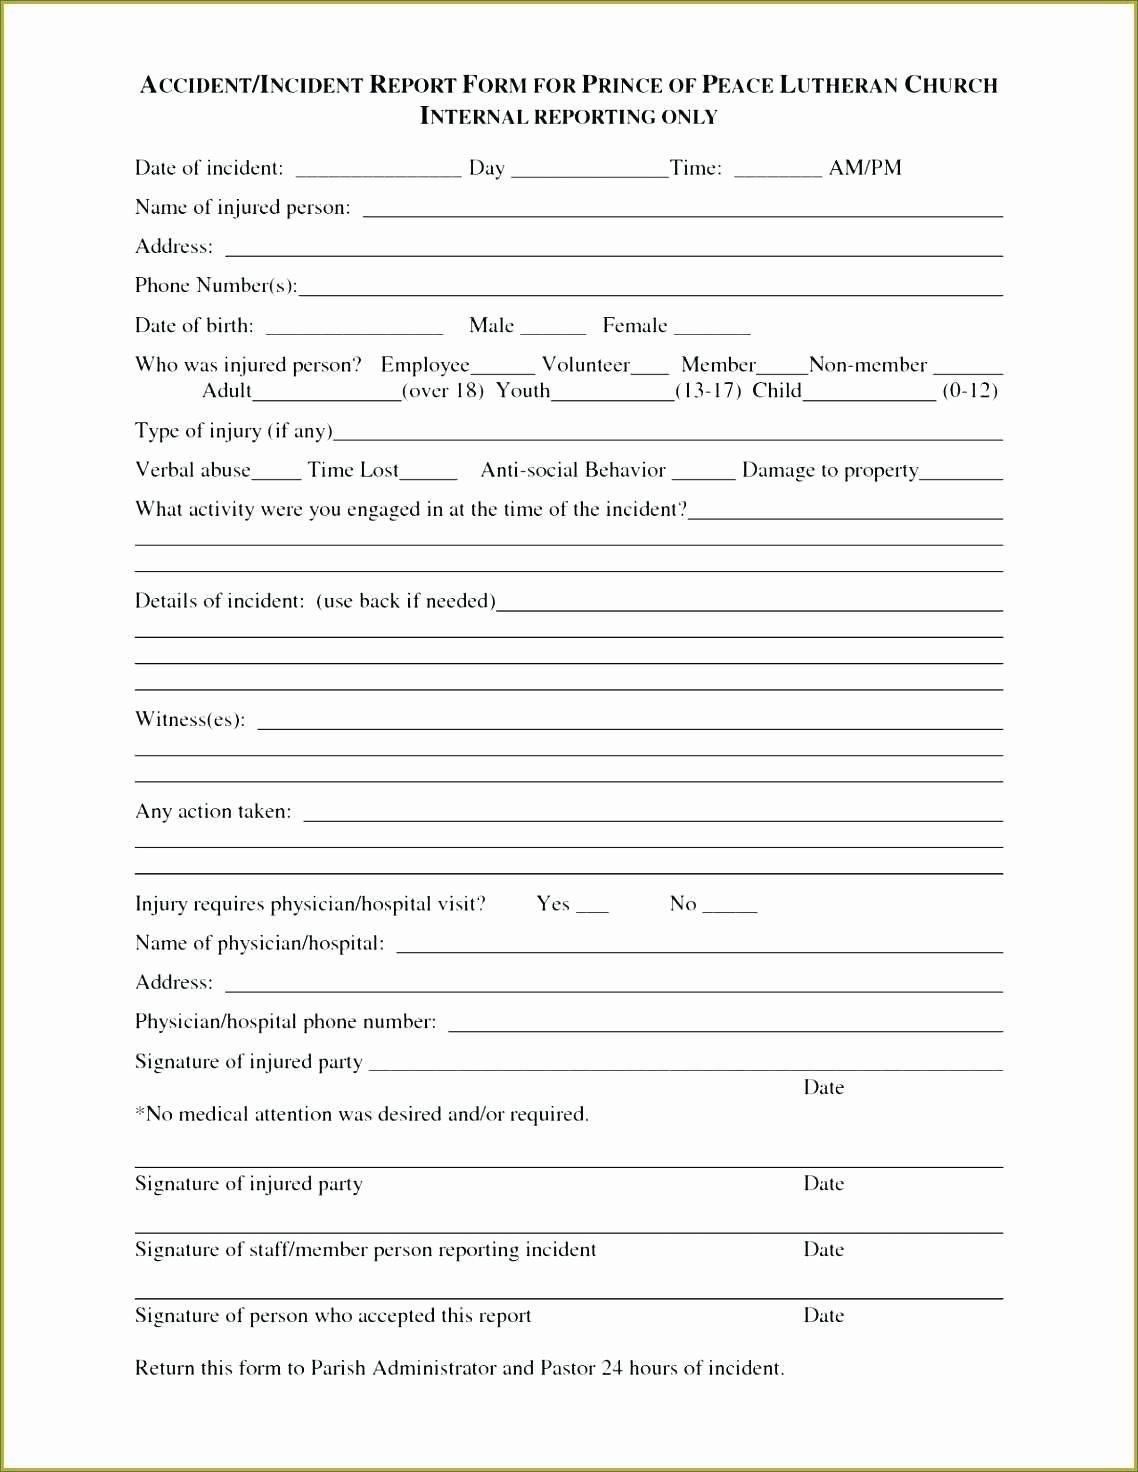 Free Registration forms Template Awesome Registration form Template Free Download Fancy form Church